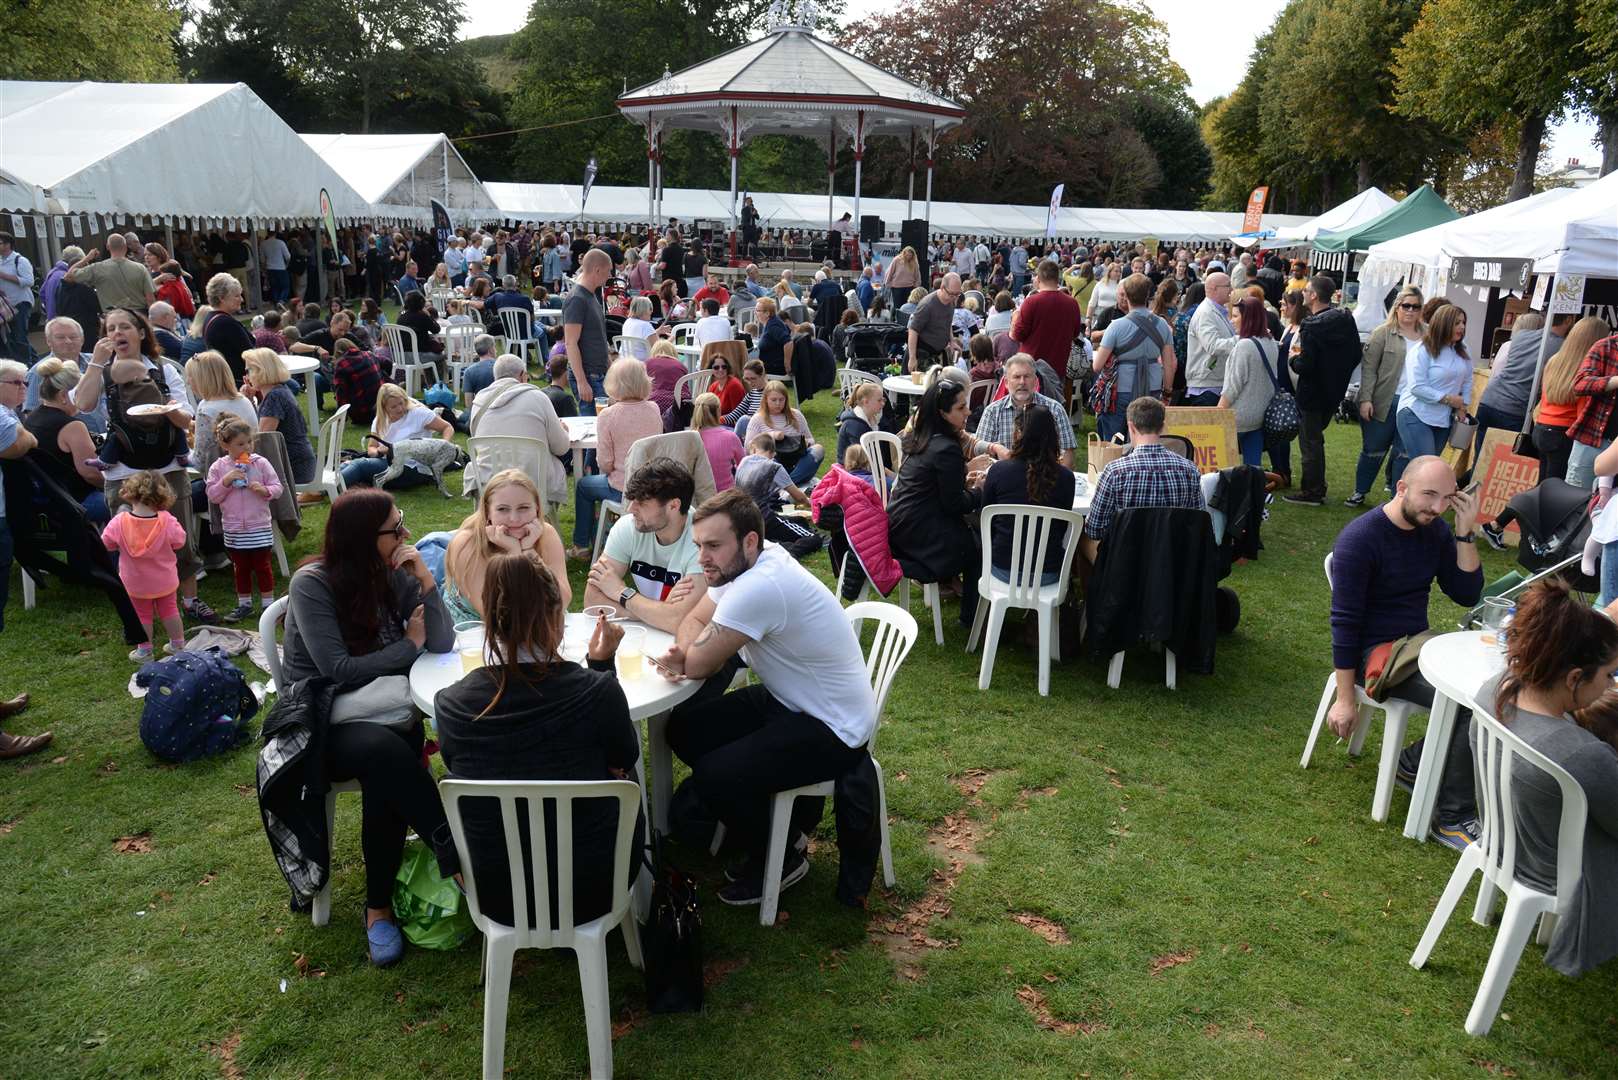 The busy scene at the Canterbury Food and Drink festival in 2017